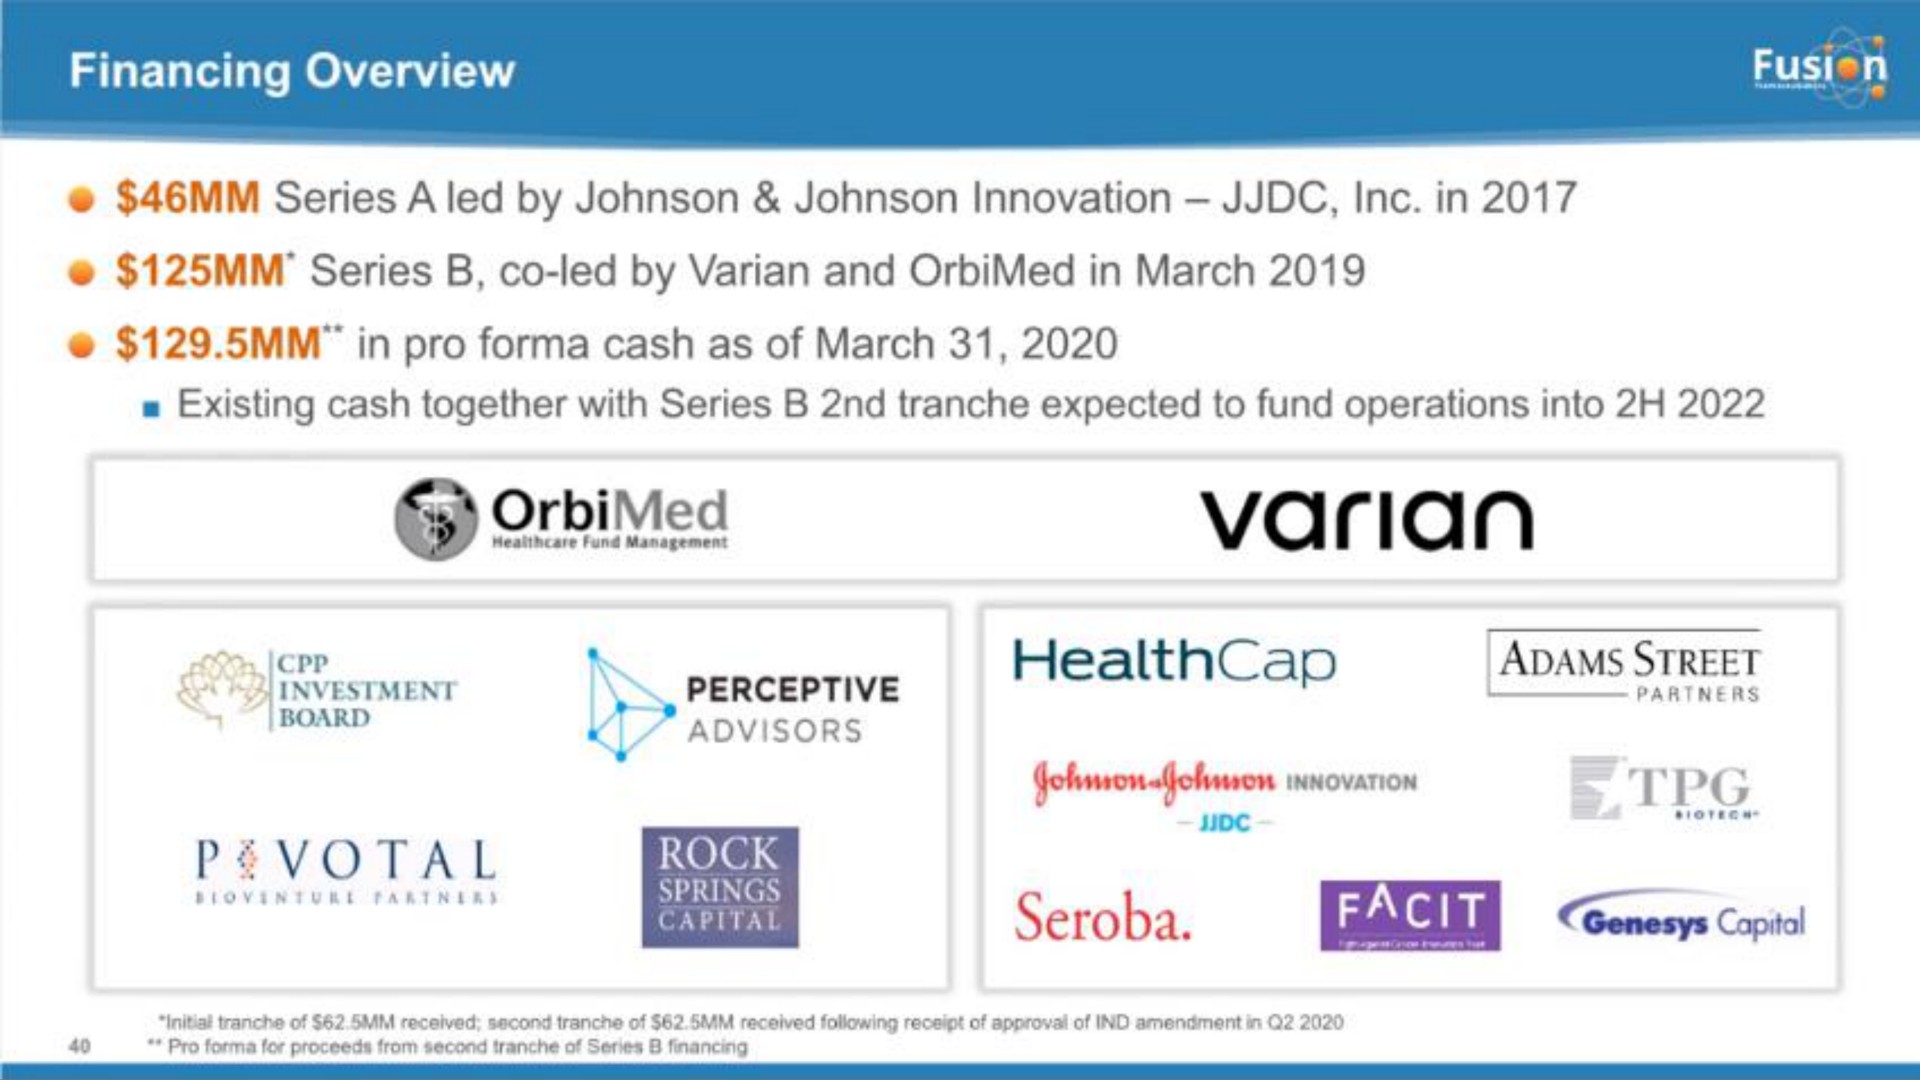 financing overview a investment perceptive poe | Fusion Pharmaceuticals